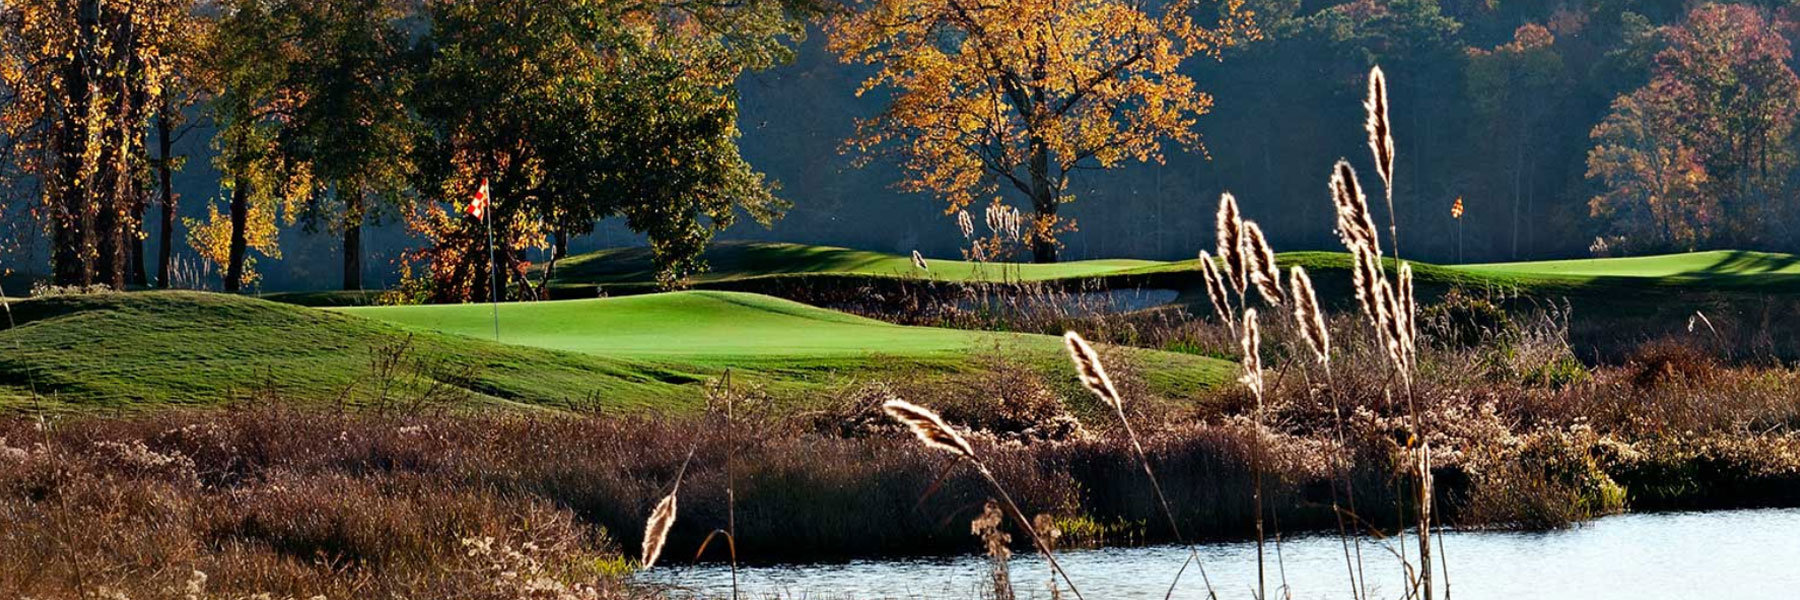 Alabama Golf Vacation Packages